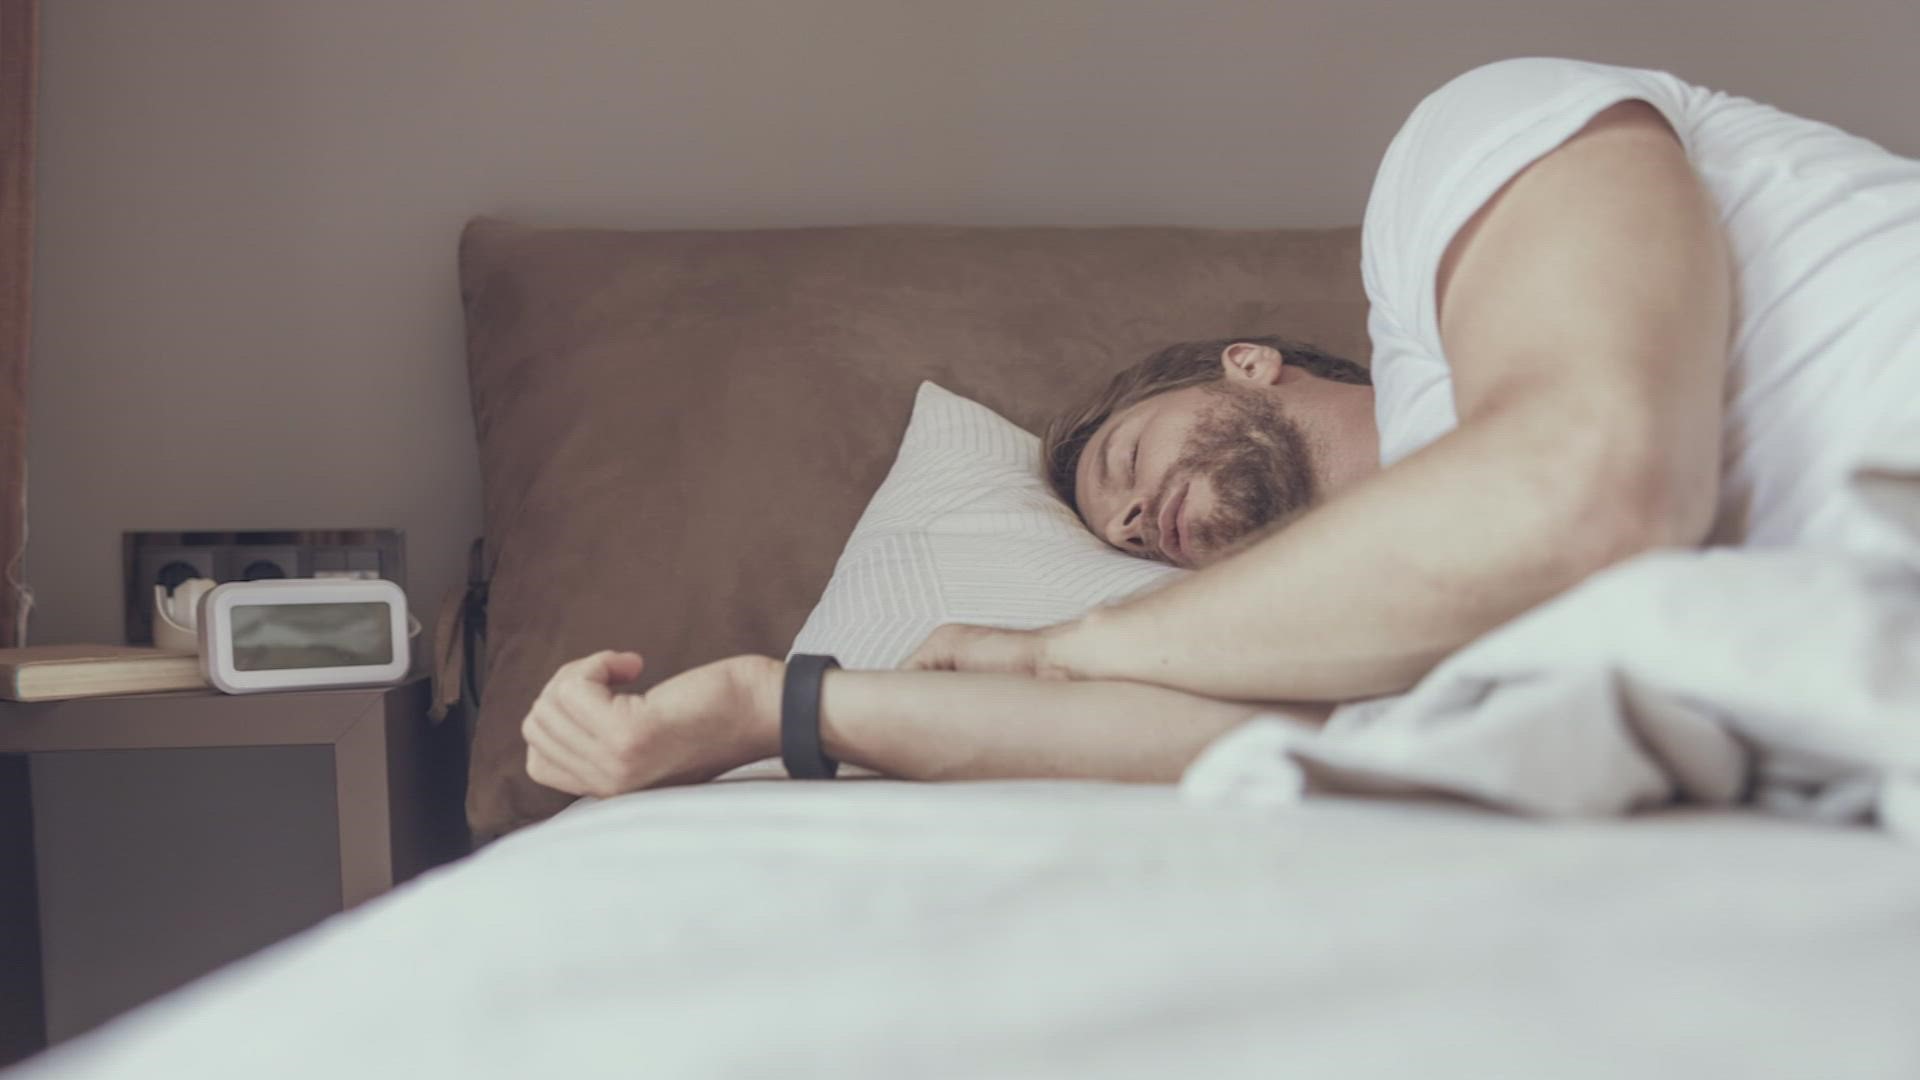 This week tackles sleep aids. Do they work? And which ones are most helpful?